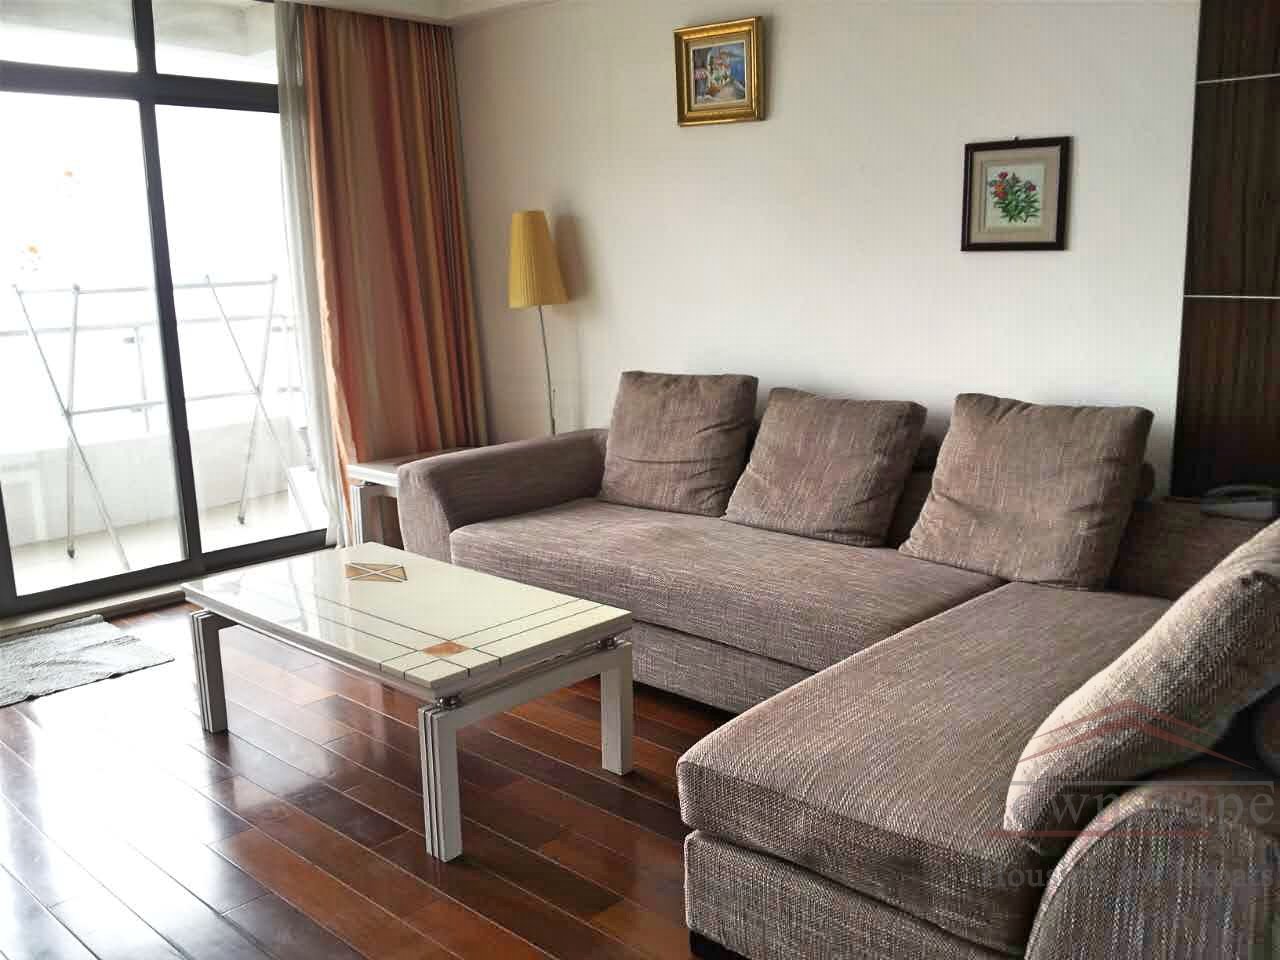  Top of City 3BR Apartment for rent in Shanghai Downtown